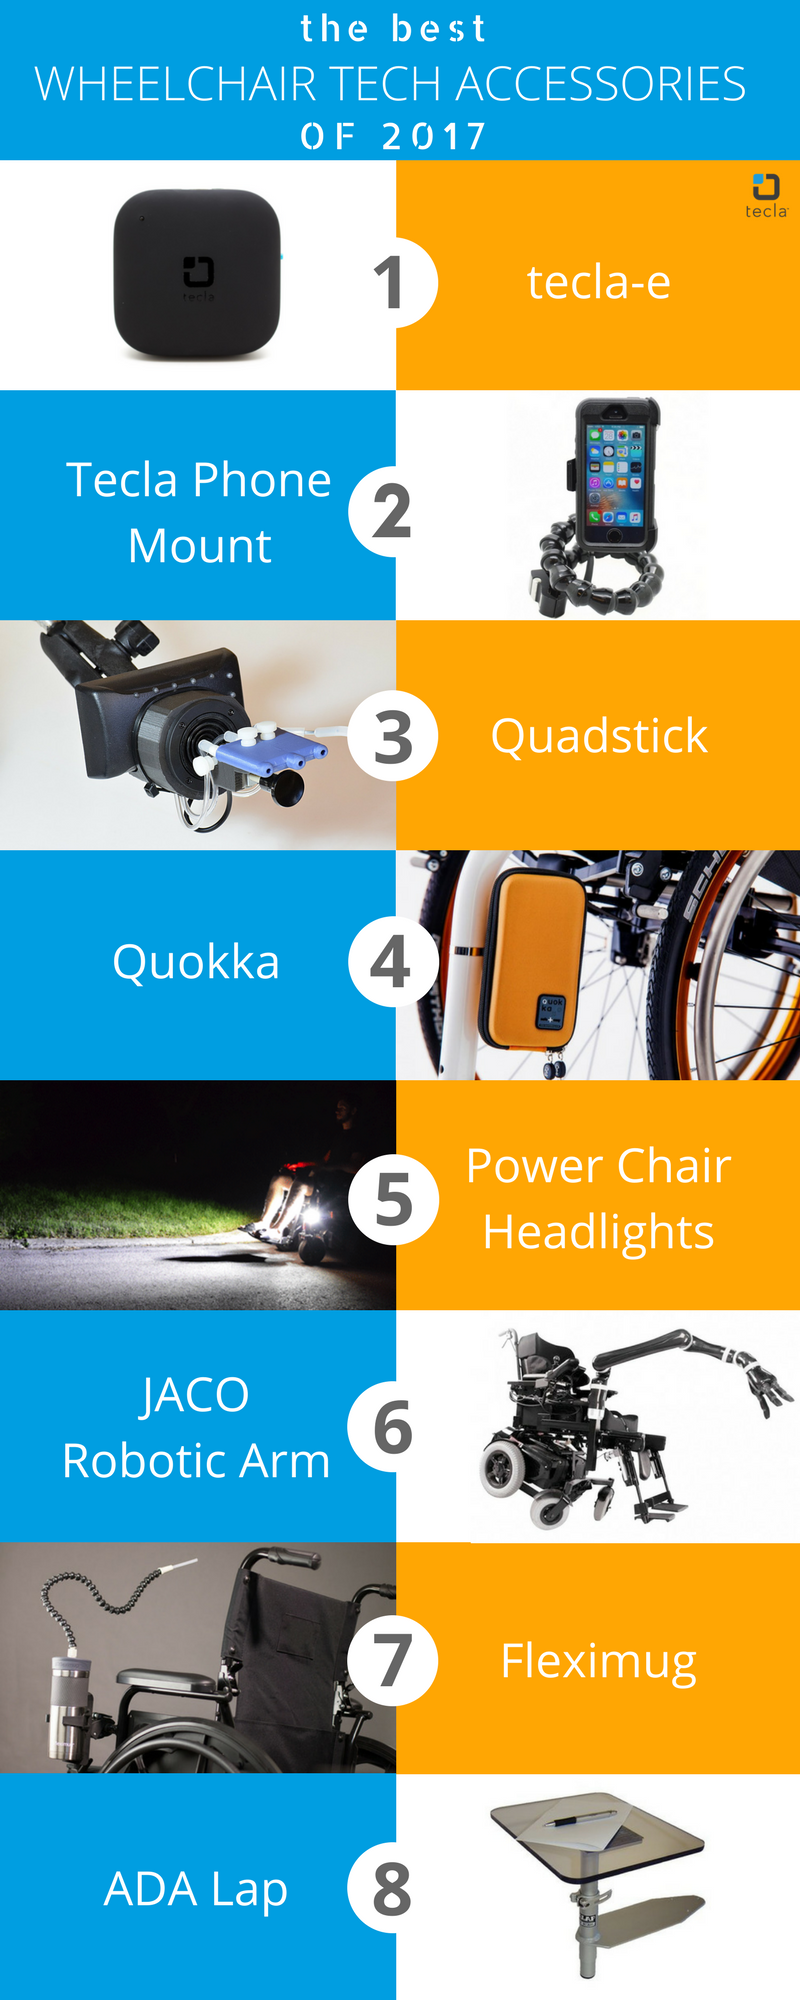 Graphic: the best wheelchair tech accessories of 2017